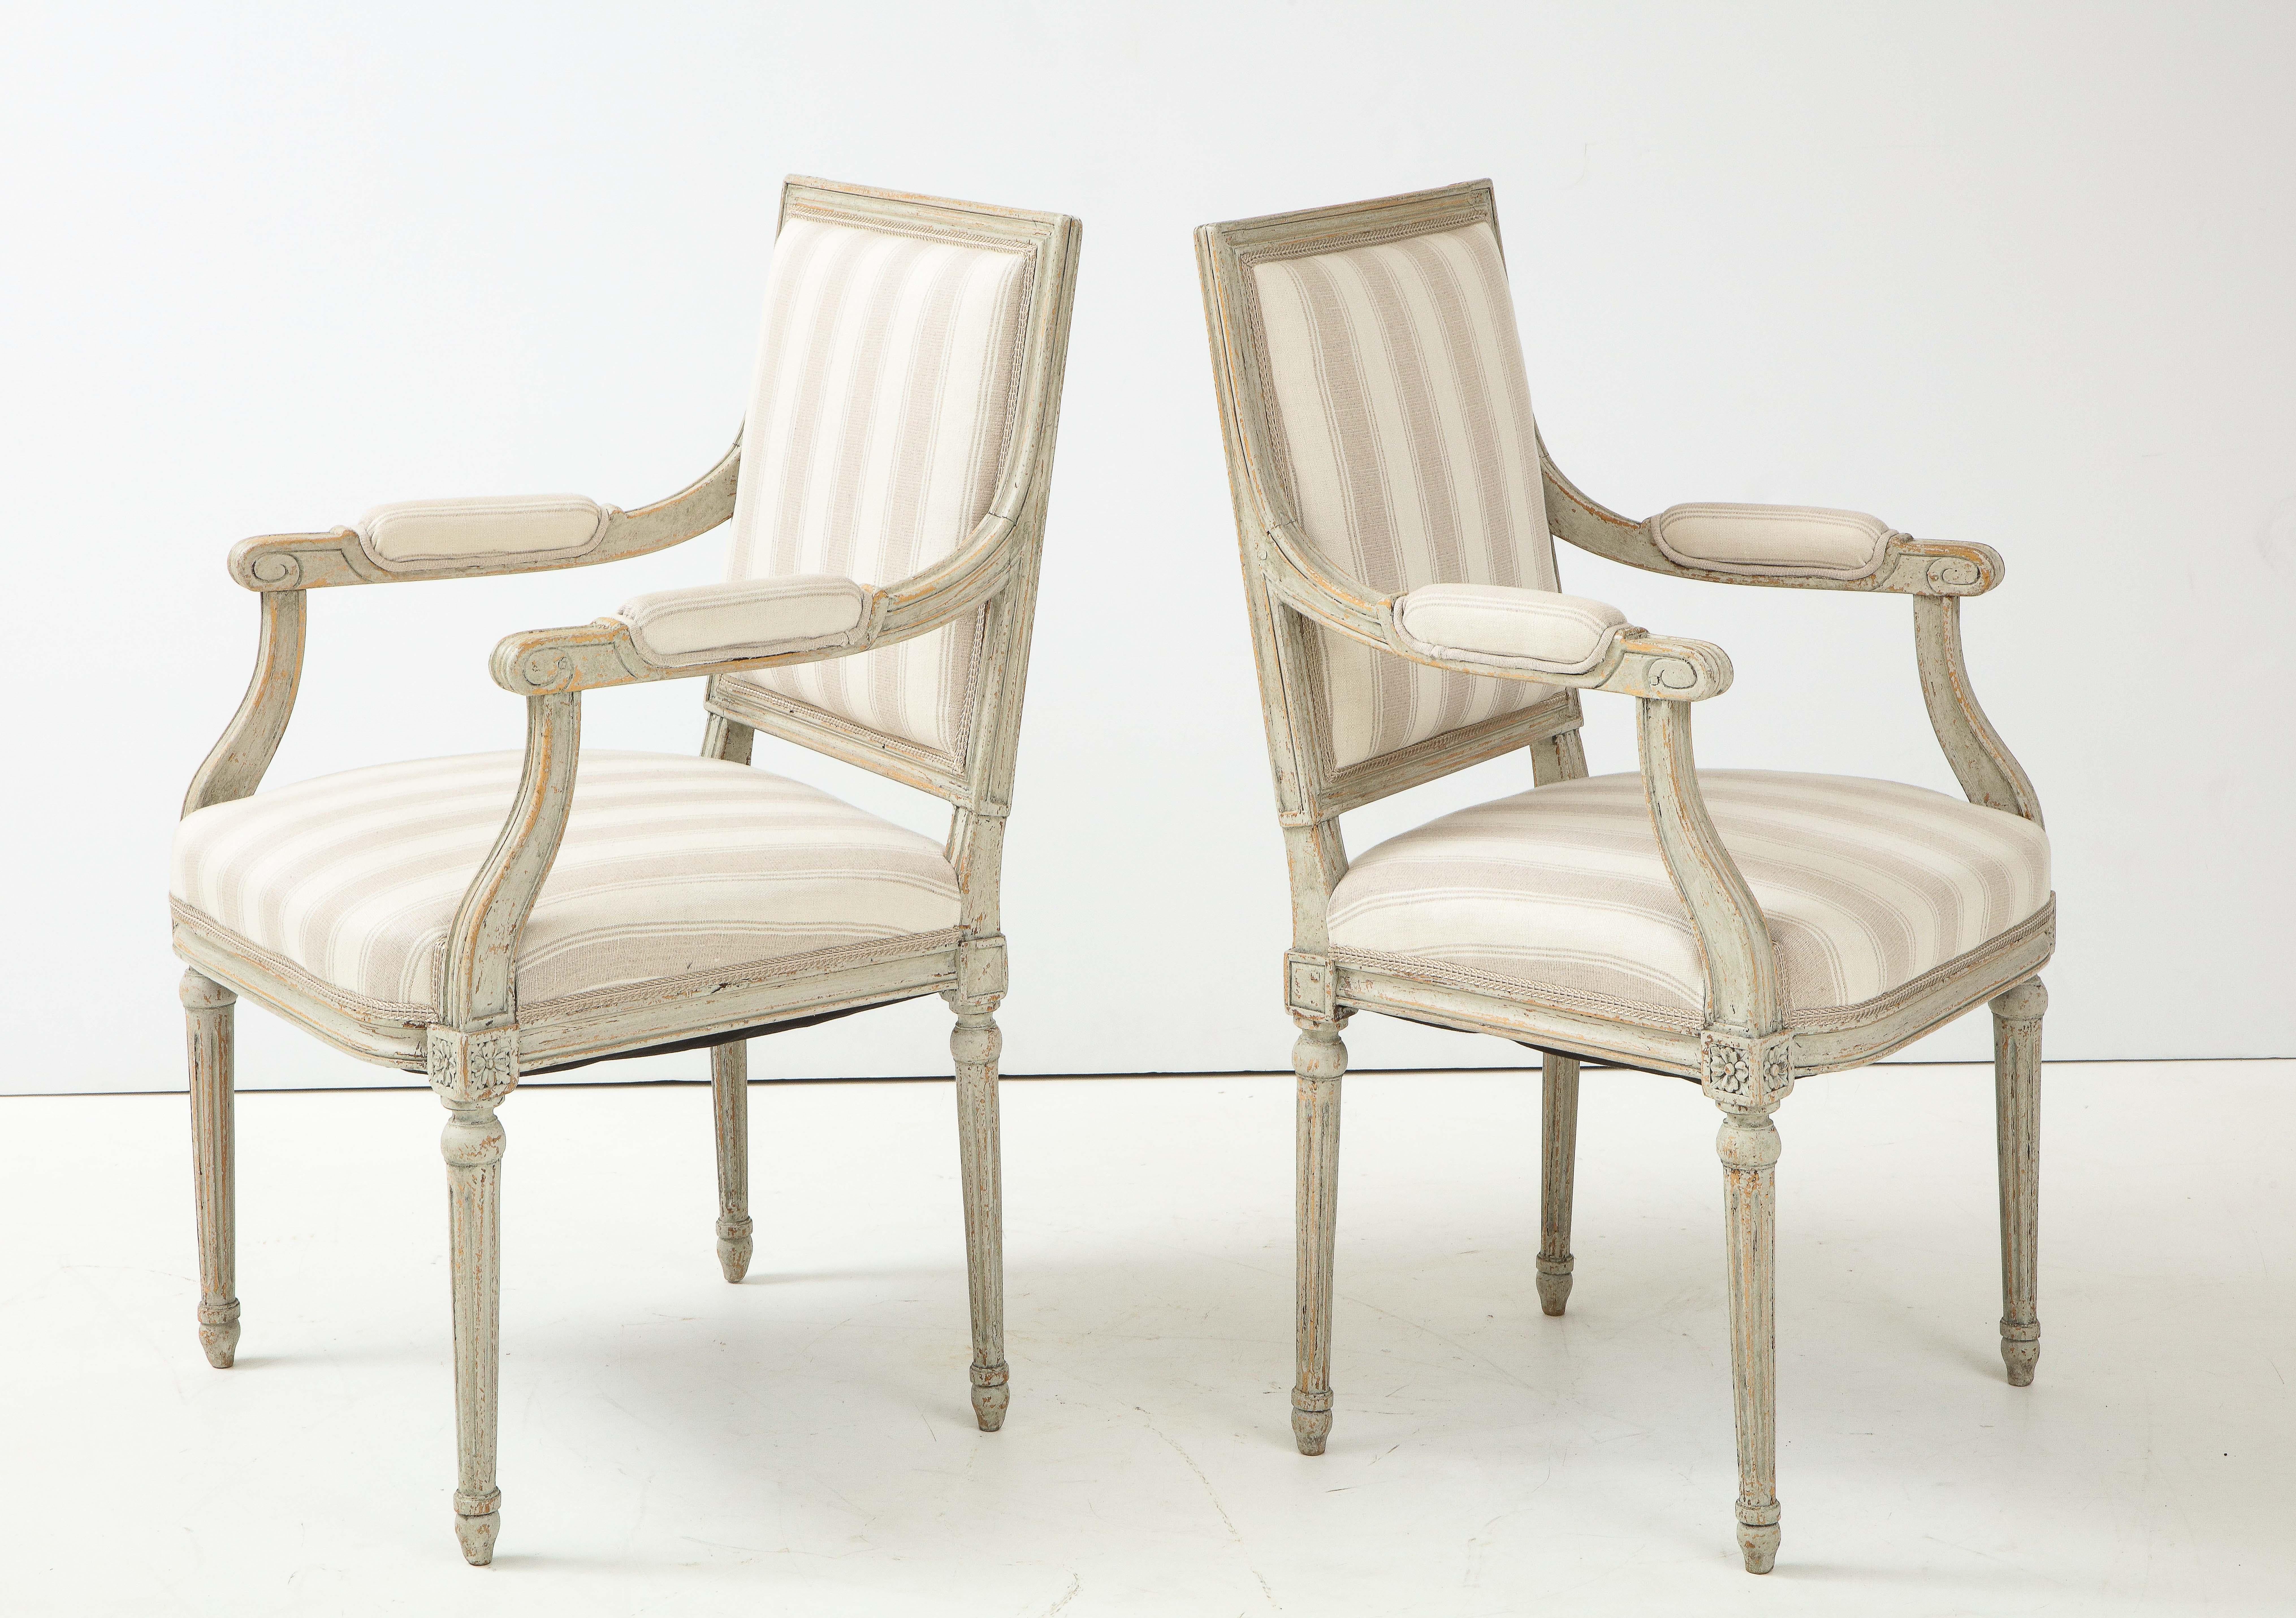 Near Pair of Swedish Late Gustavian Style Painted Open Armchairs, Circa 1870s 1